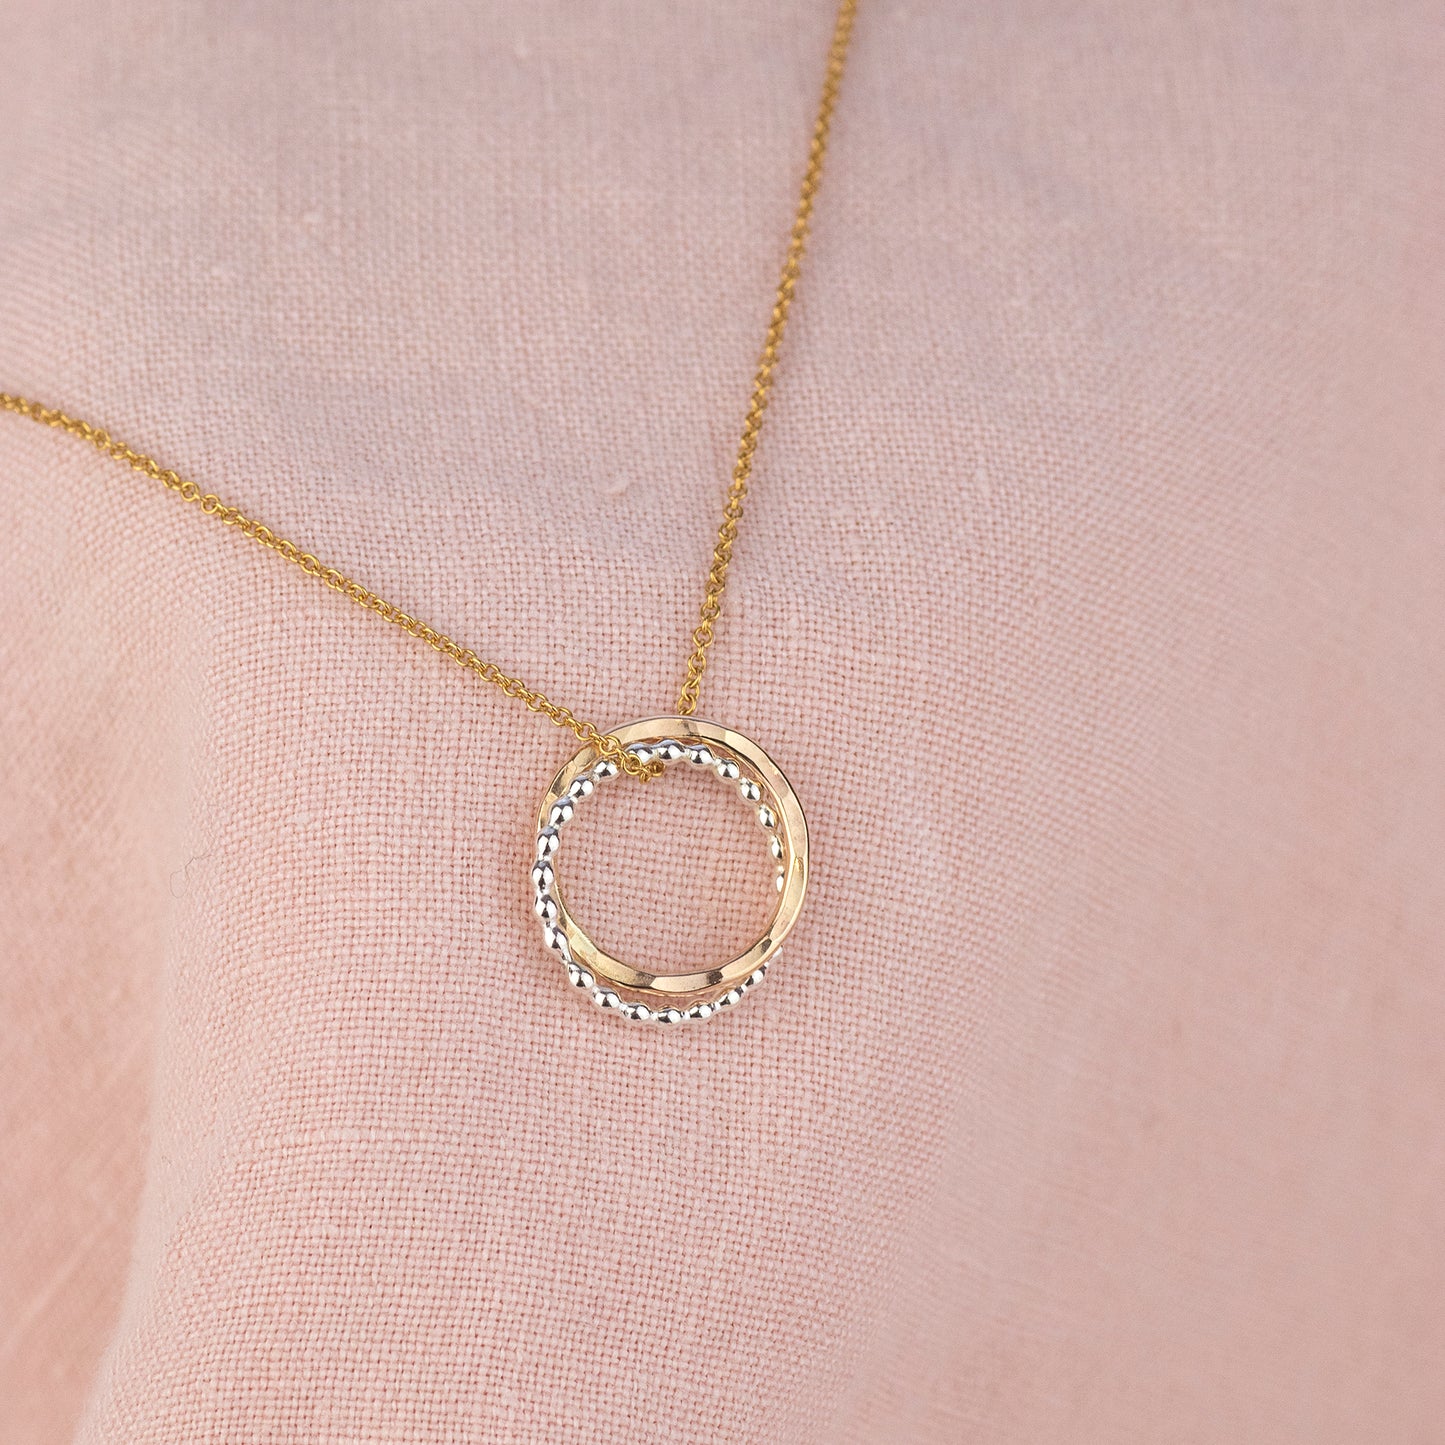 2nd Anniversary Necklace - The Original 2 Rings for 2 Years Necklace - Petite Silver & Gold